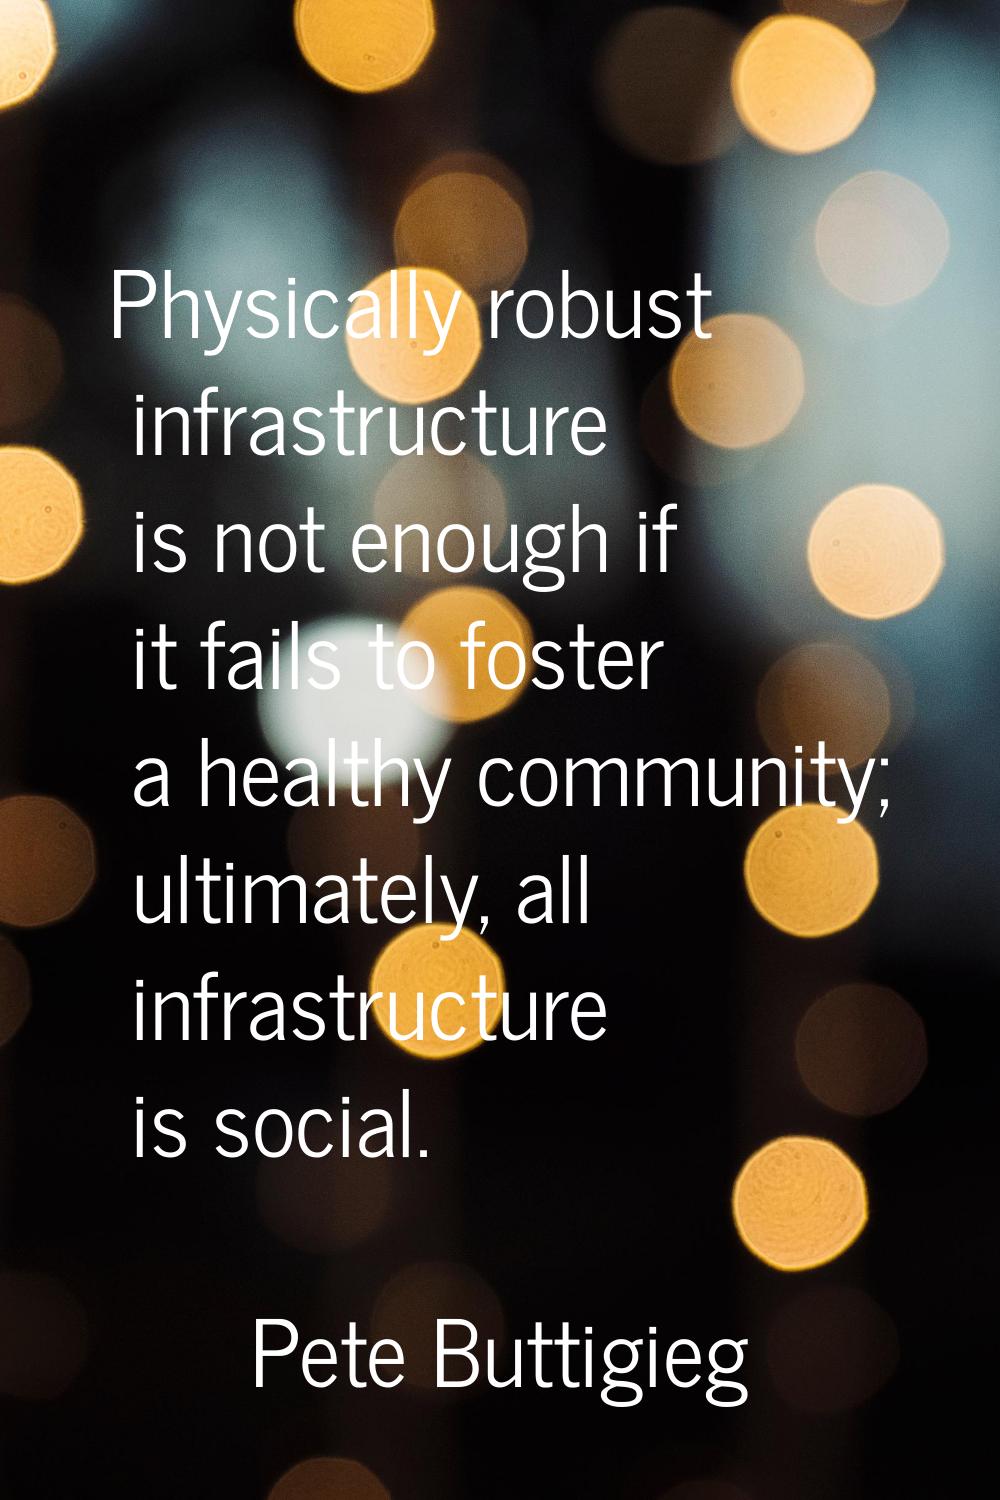 Physically robust infrastructure is not enough if it fails to foster a healthy community; ultimatel